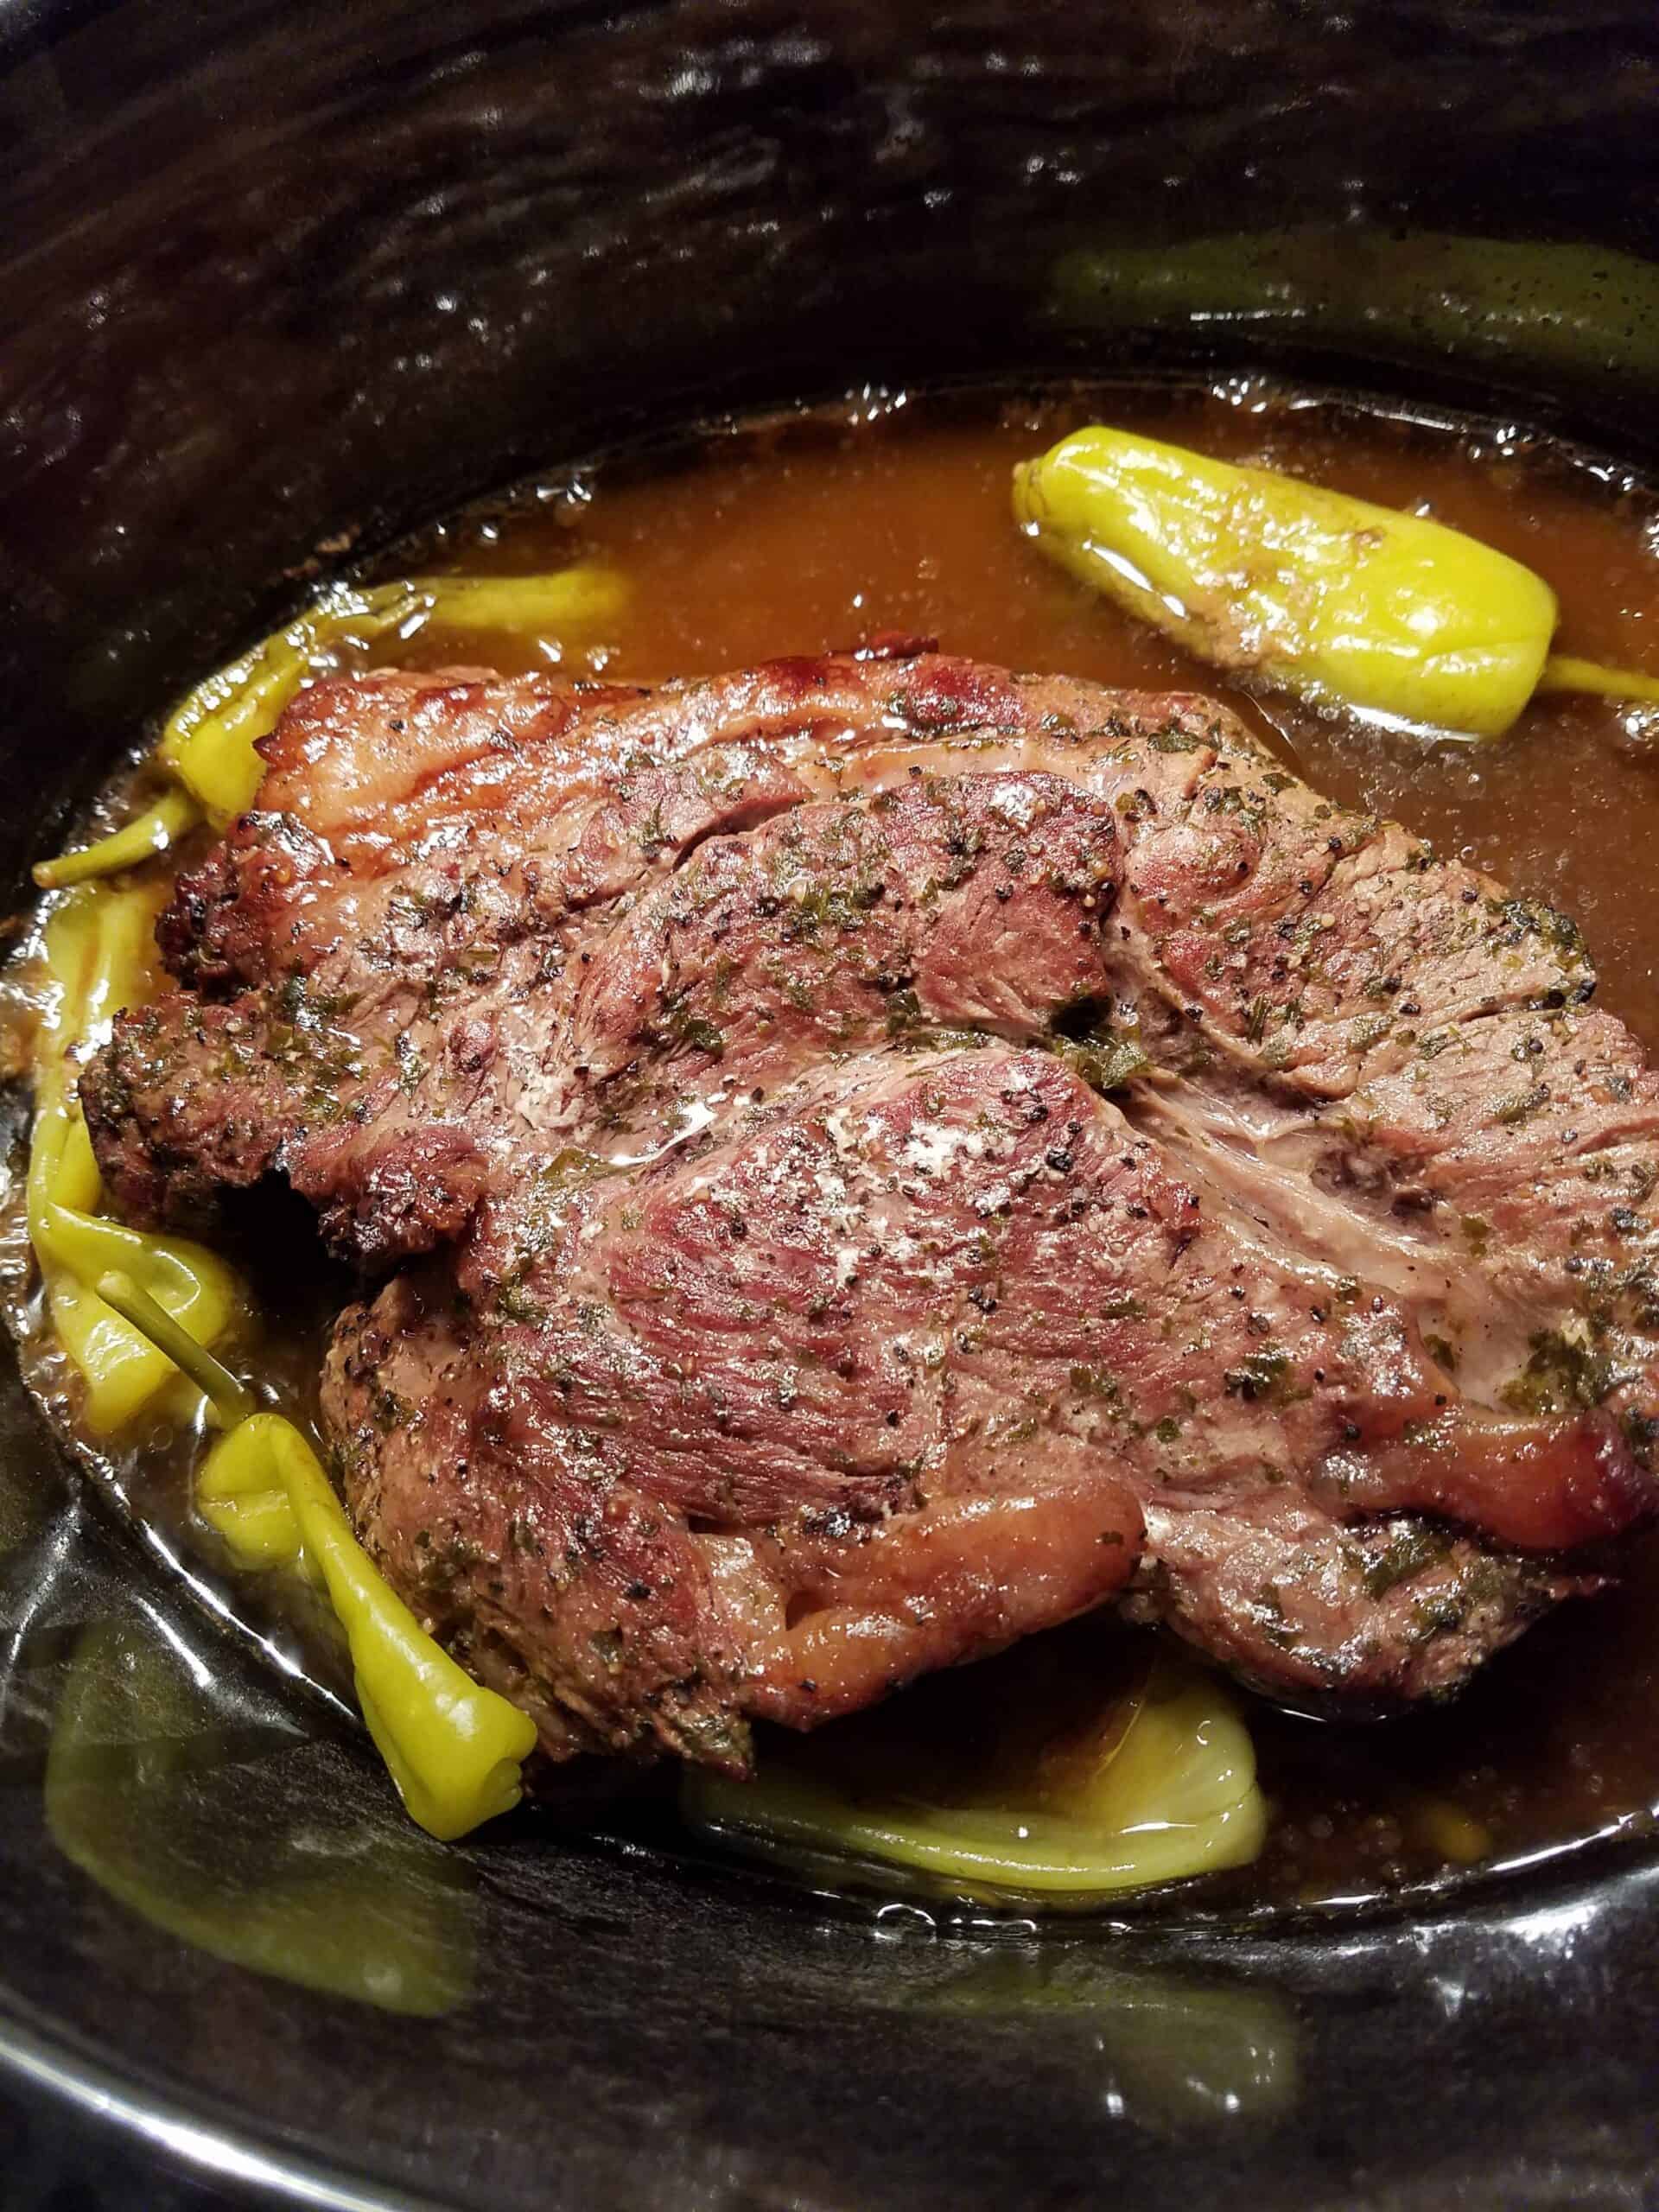 finished cooked beef roast and peppers in crockpot